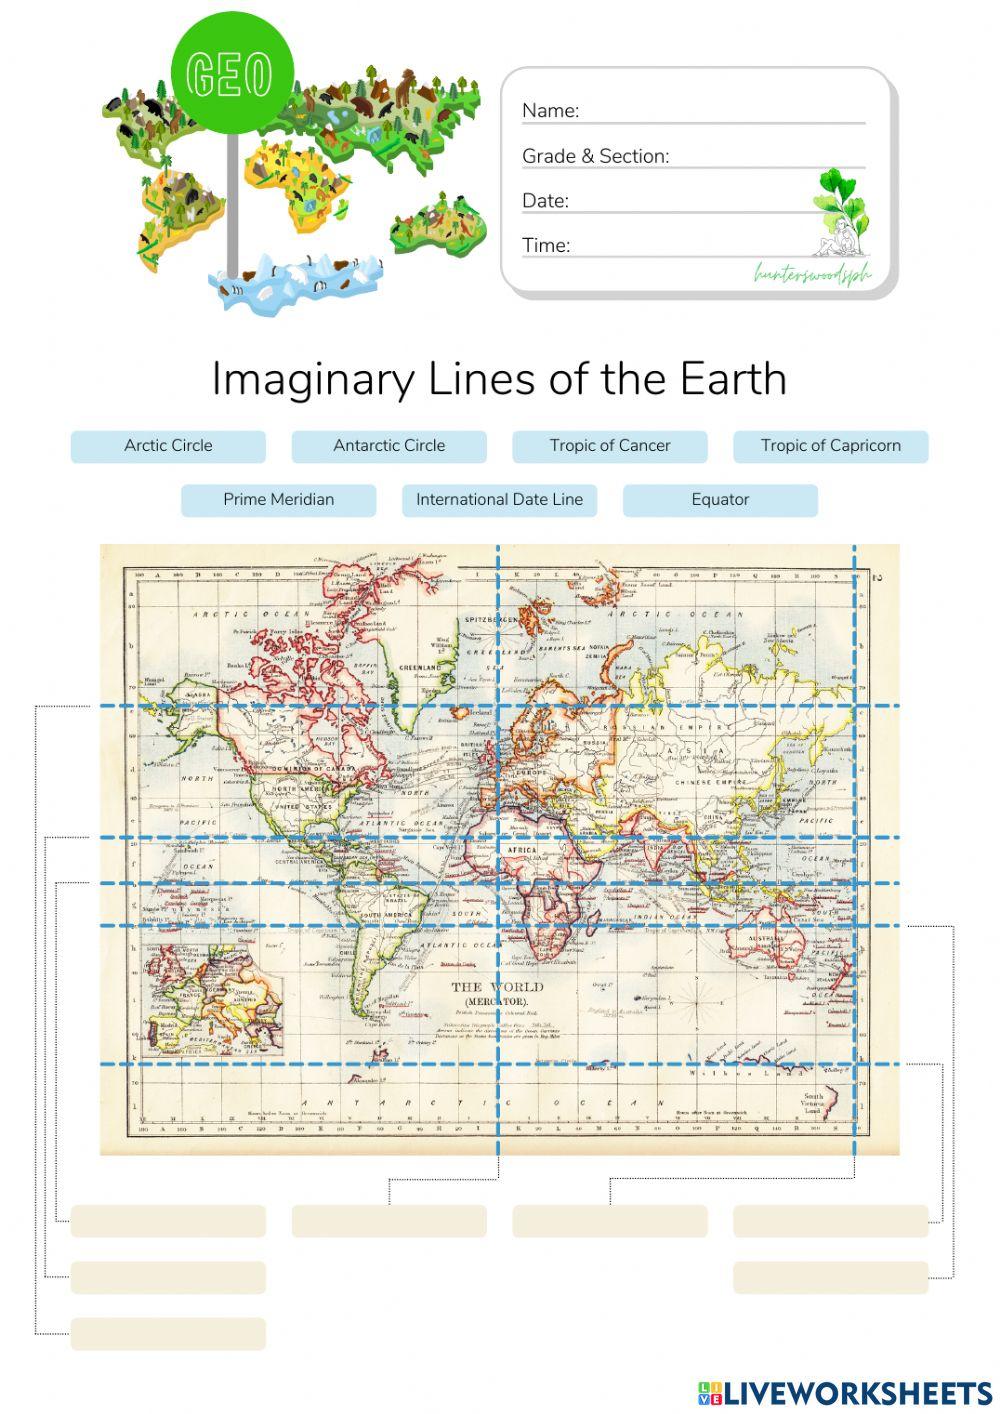 Imaginary Lines of the Earth - HuntersWoodsPH.com Worksheet